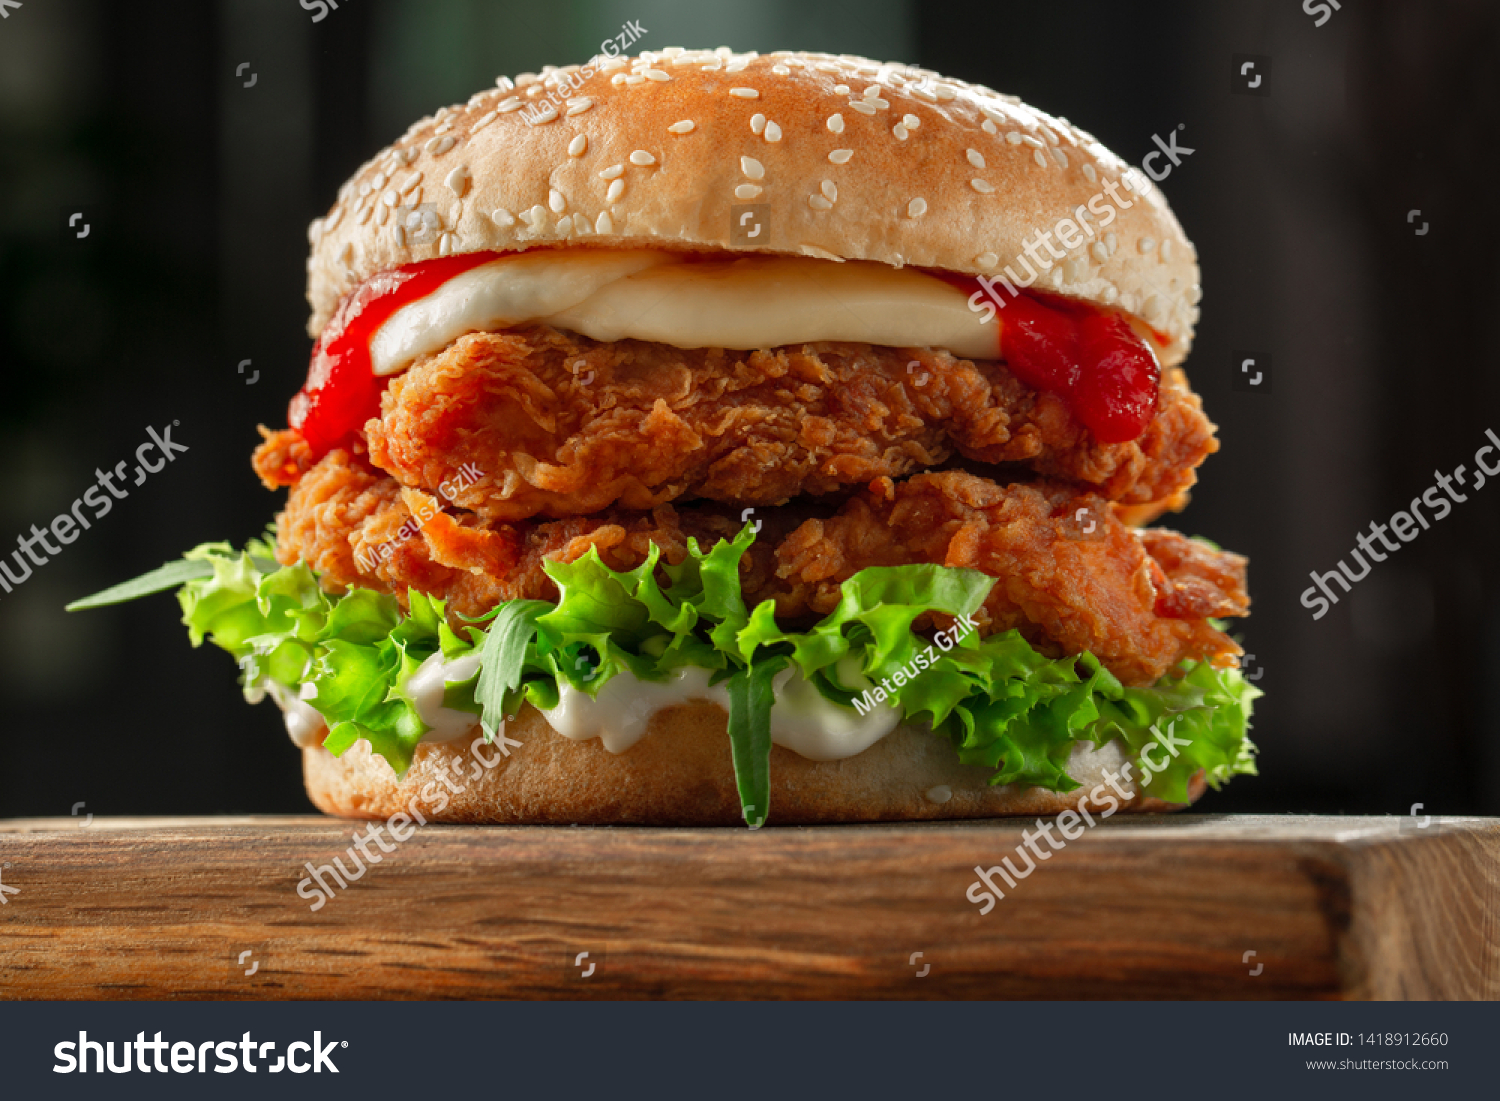 crispy, breaded chicken burger with mozzarella cheese standing on wooden cutting board #1418912660